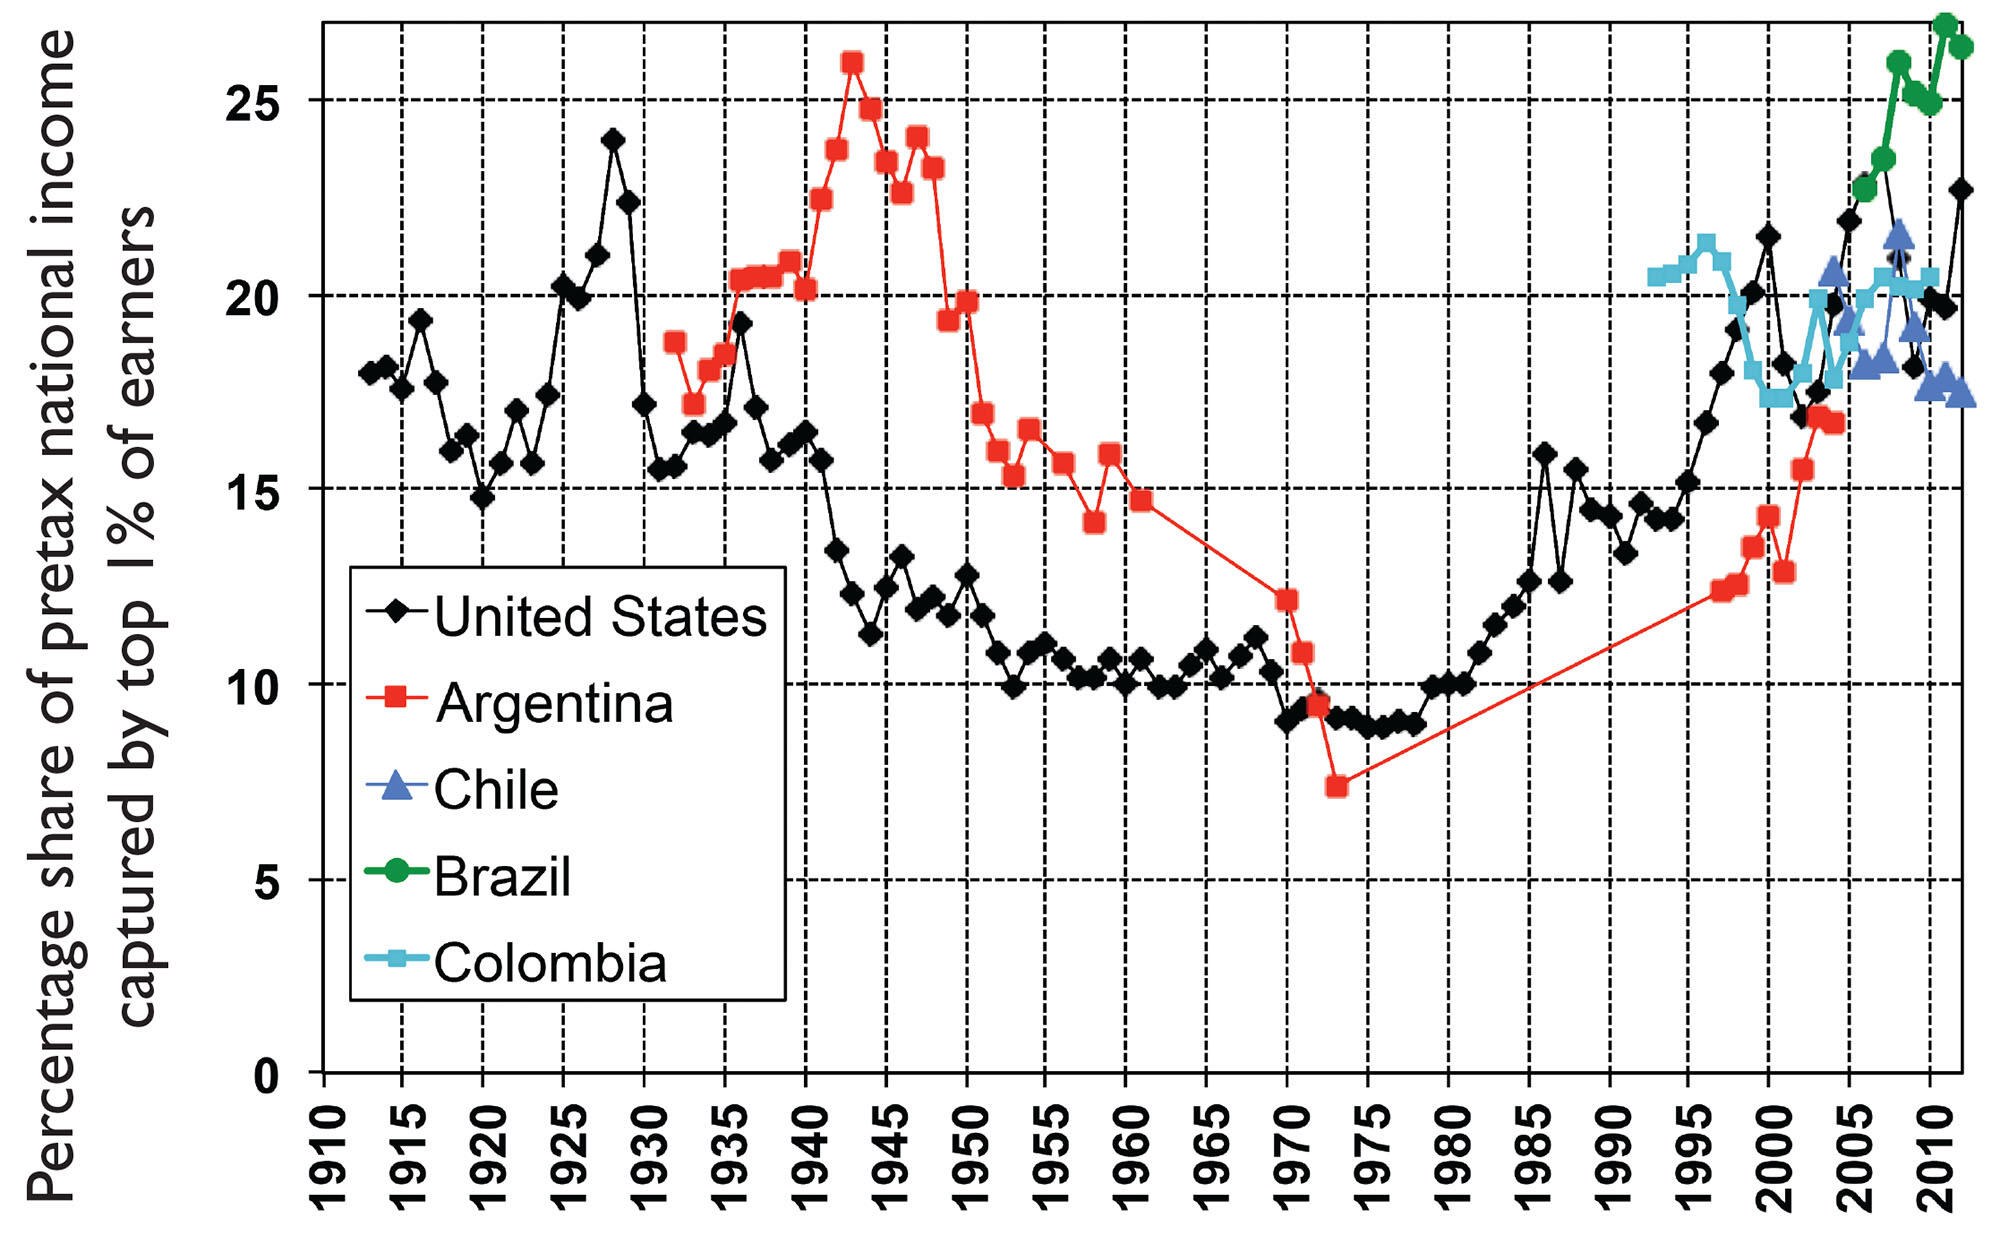 Chart showing the increasing percentage share of pretax national income captured by top 1% of earners in the U.S. and Latin American countries. (Chart courtesy of Emmanuel Saez.)